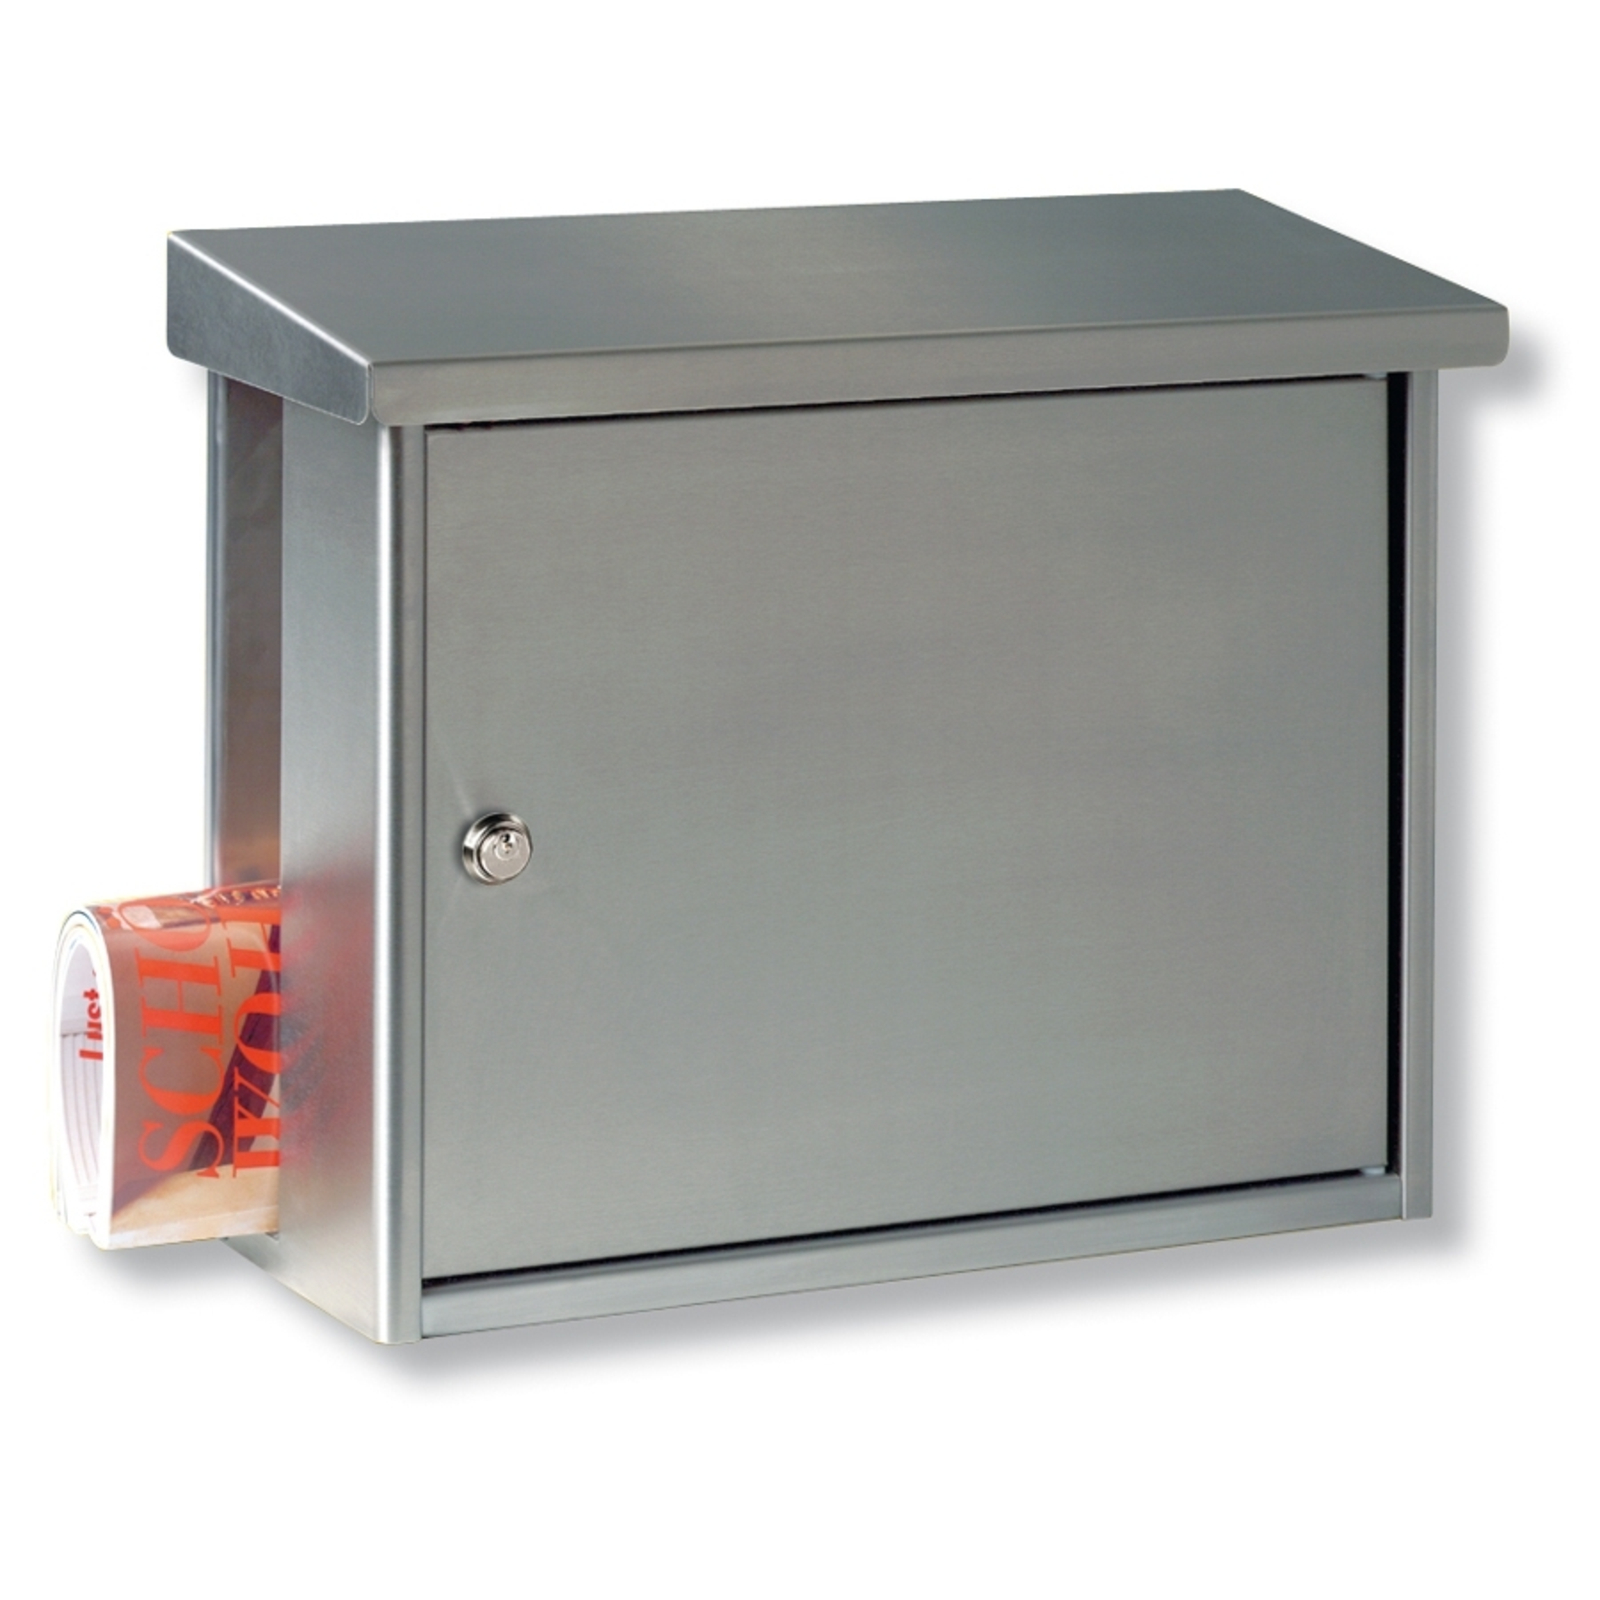 Classic Hanseatic stainless steel letterbox